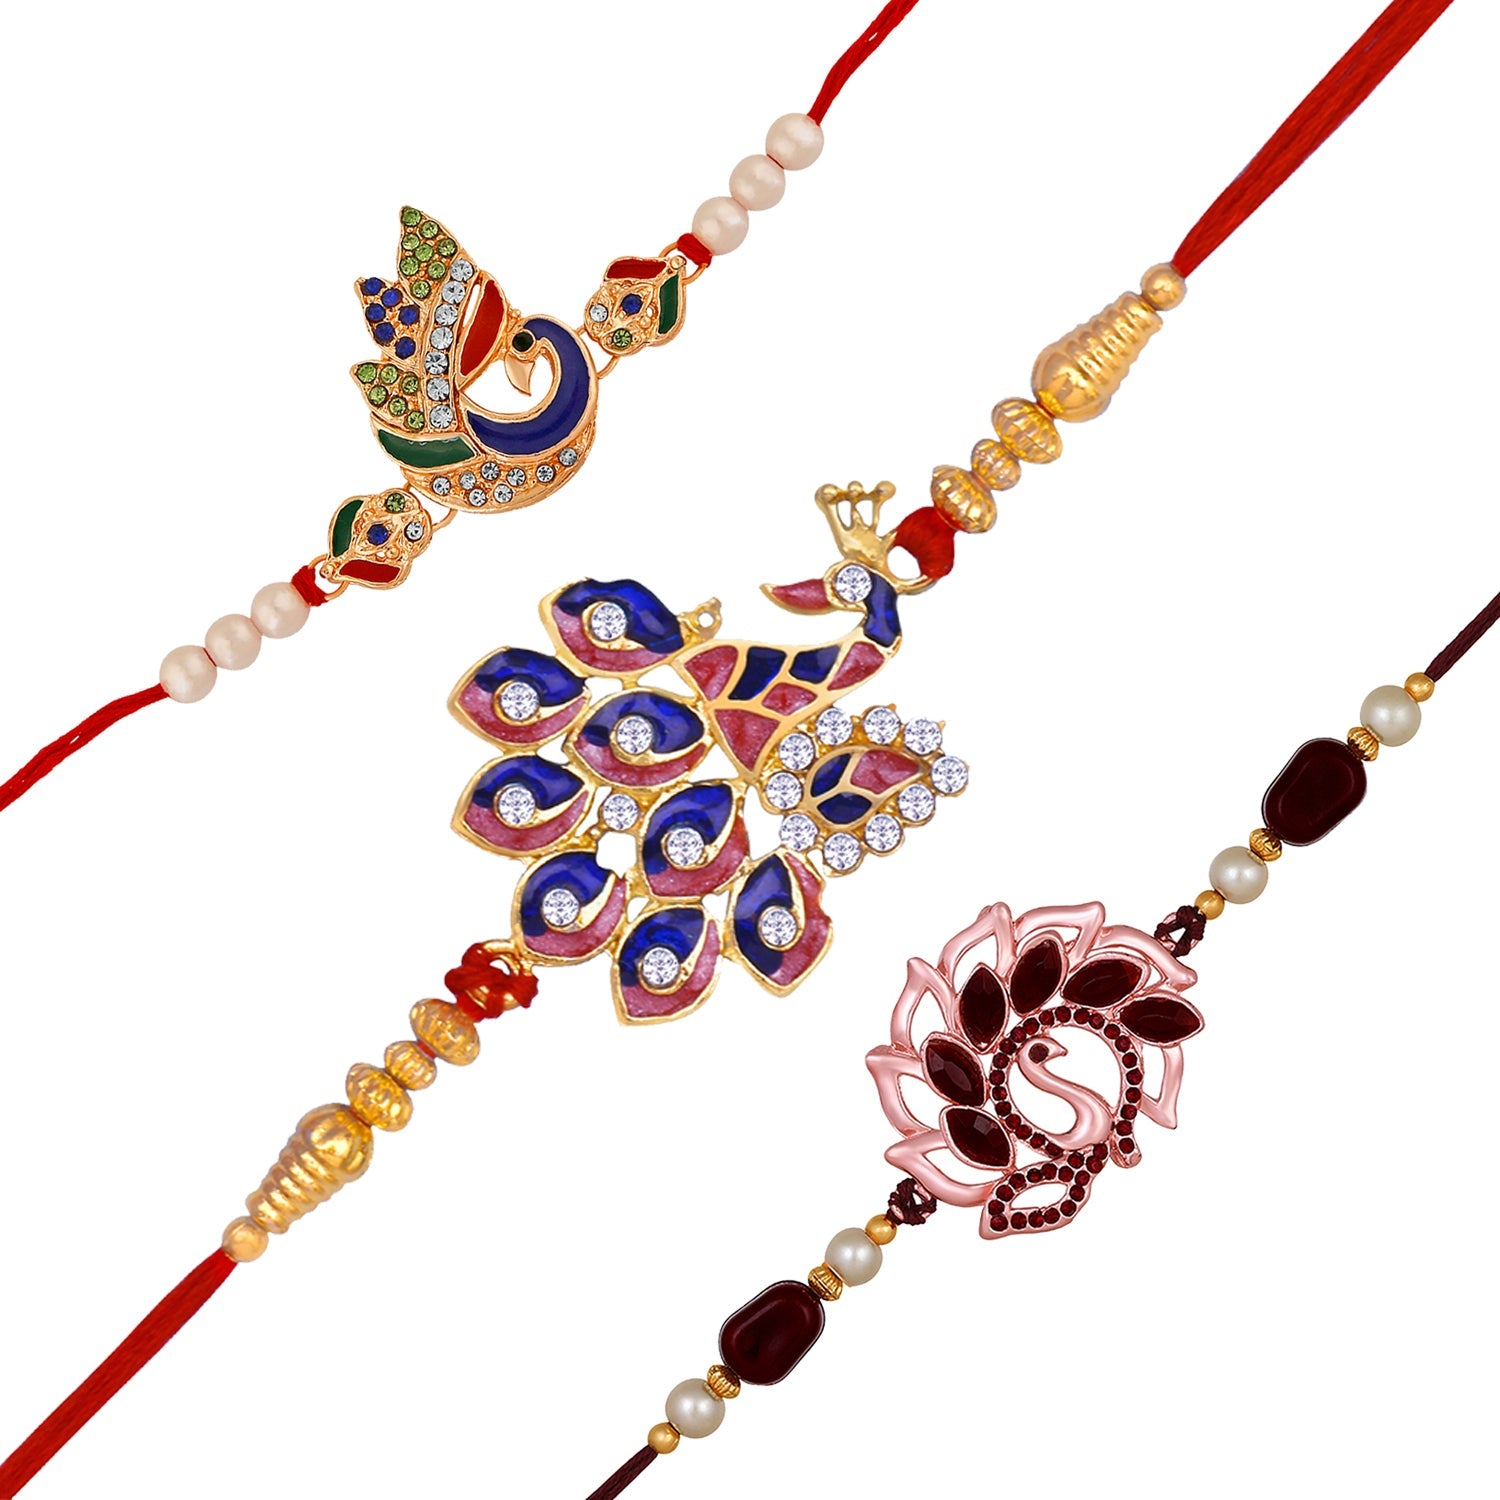 Mahi Combo of 3 Charming Peacock Shaped Rakhis with Meenakari Work and Crystals for Brothers (RCO1105534M)